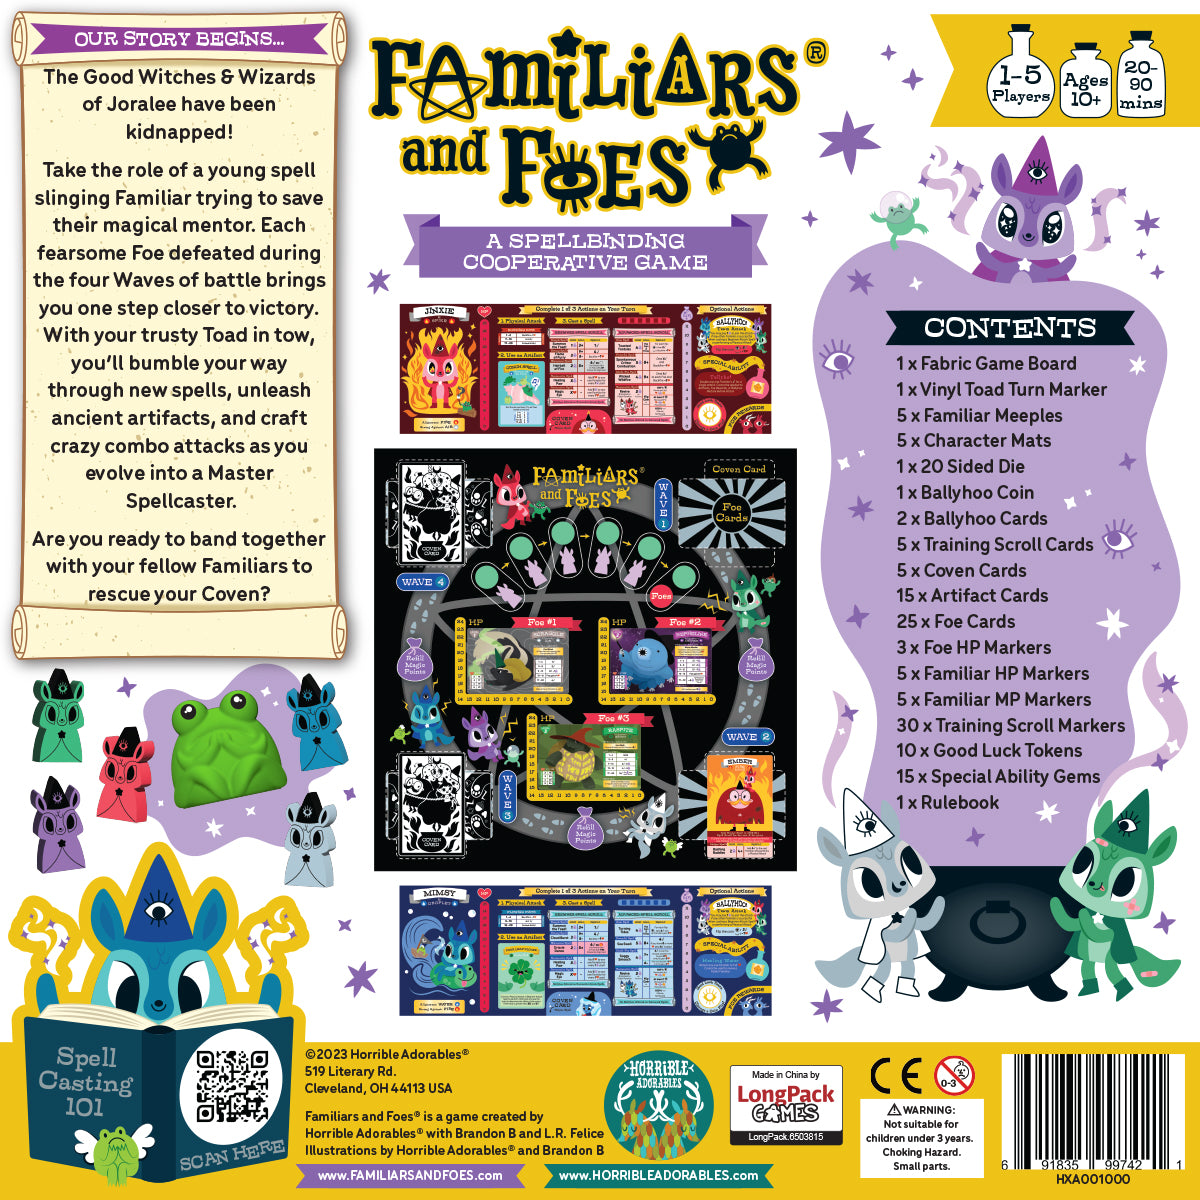 Horrible Adorables Familiars and Foes: A Spellbinding Cooperative Board Game - Back of Box